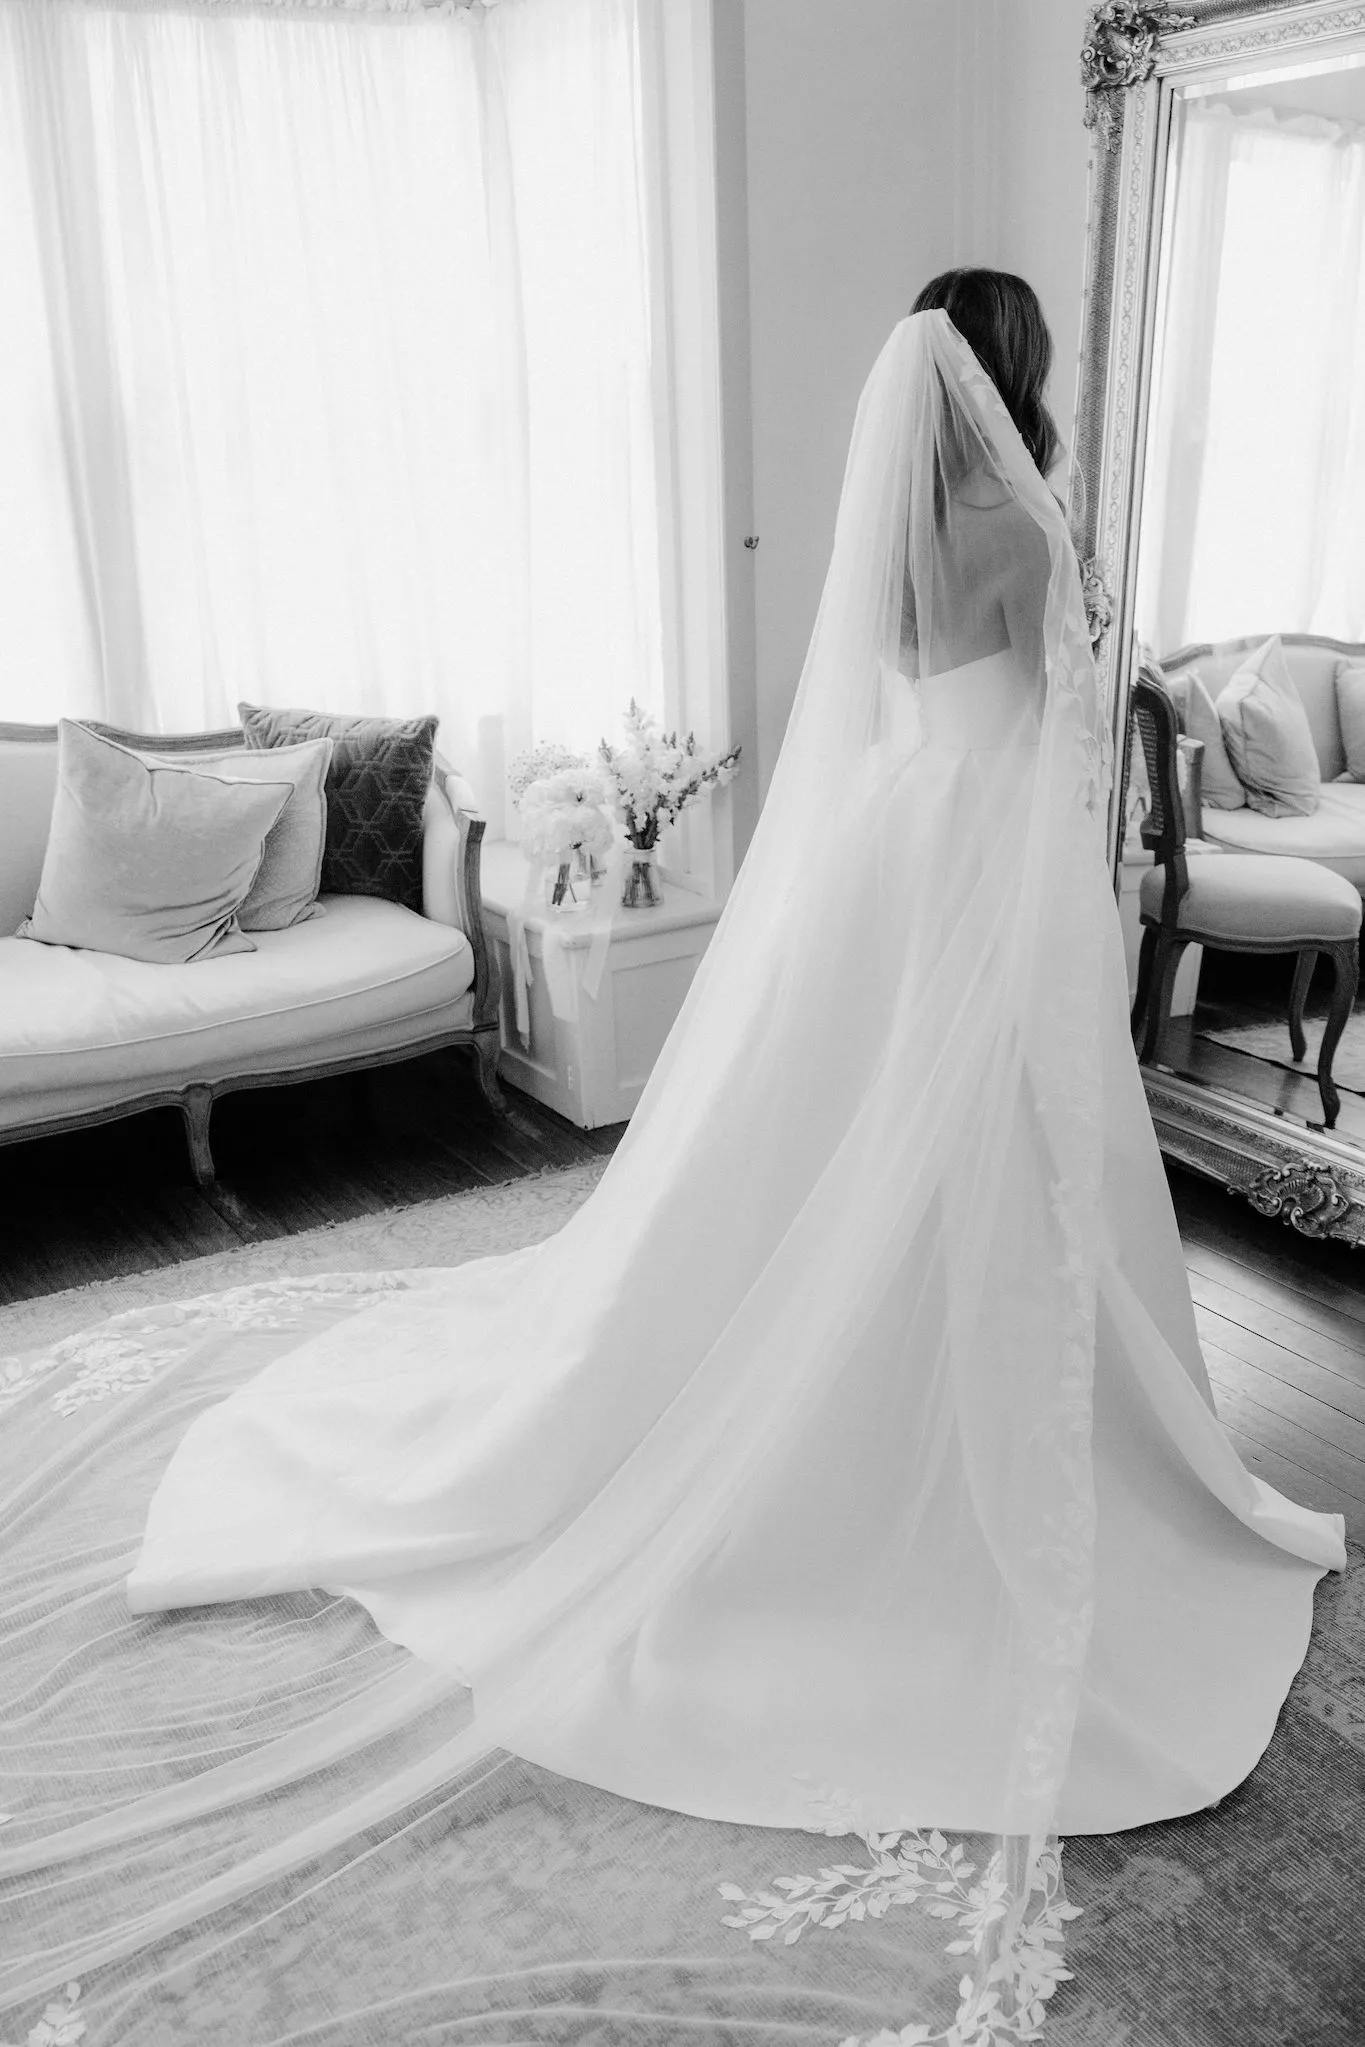 Bride standing in front of mirror with wedding dress and bouquet